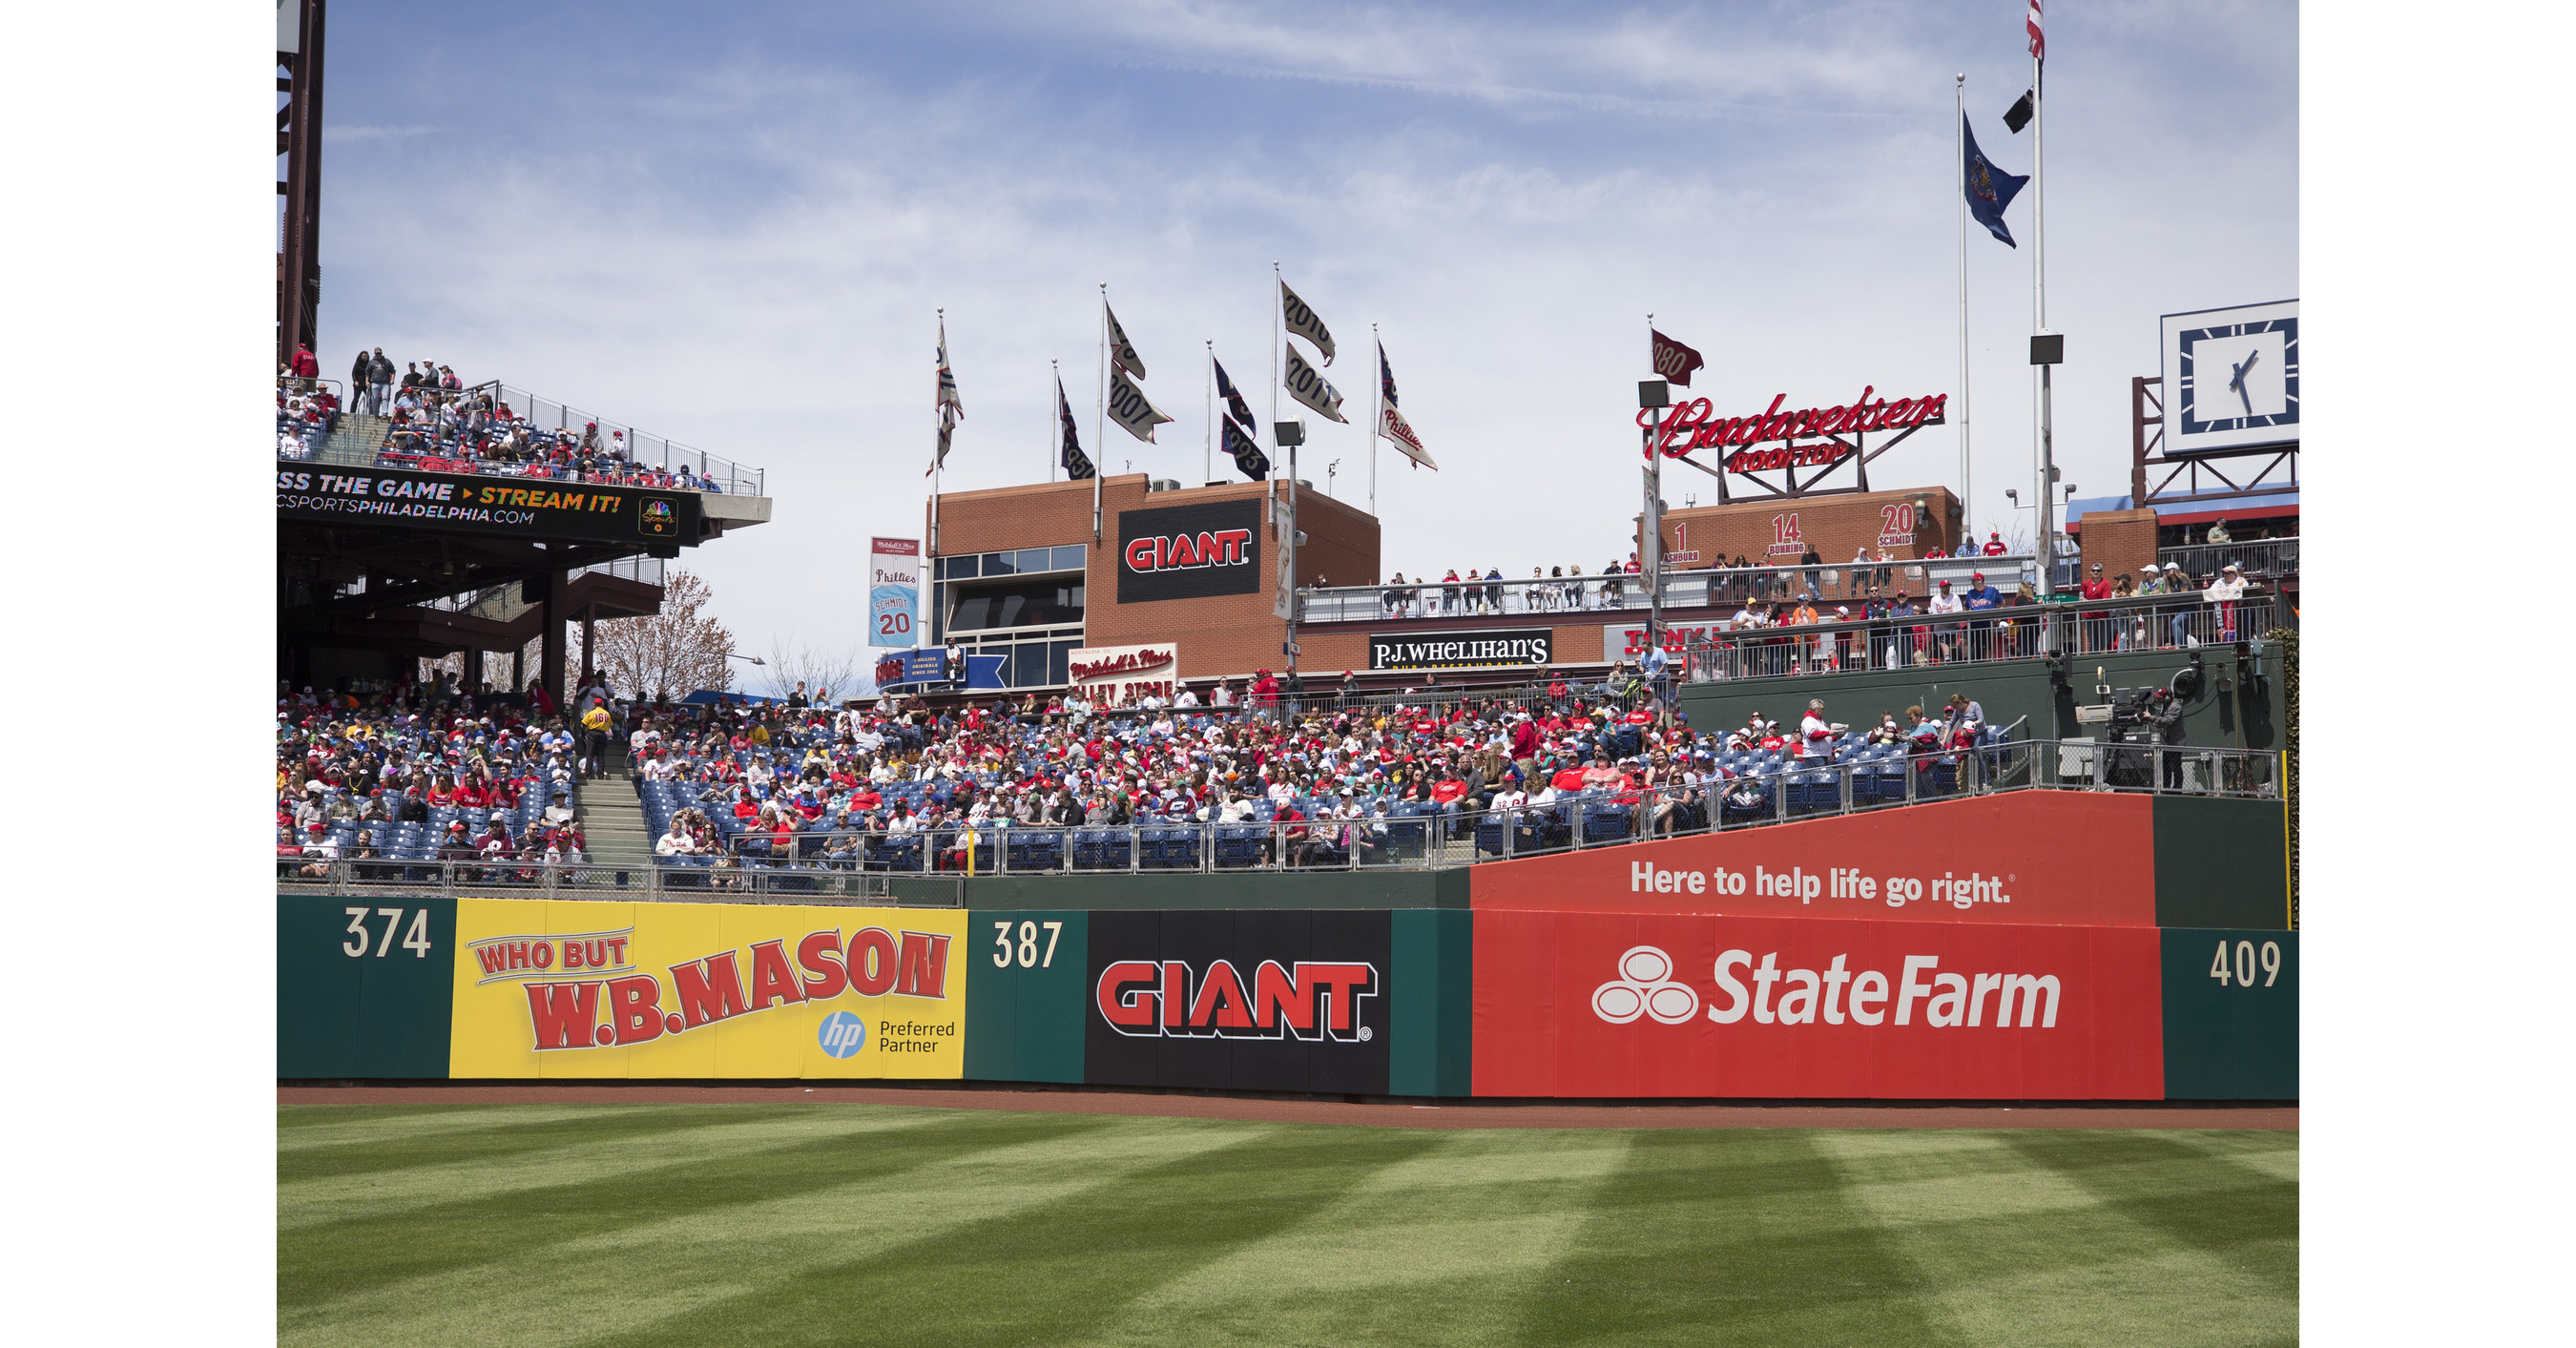 Talk about a Home Run! GIANT partners with the Philadelphia Phillies